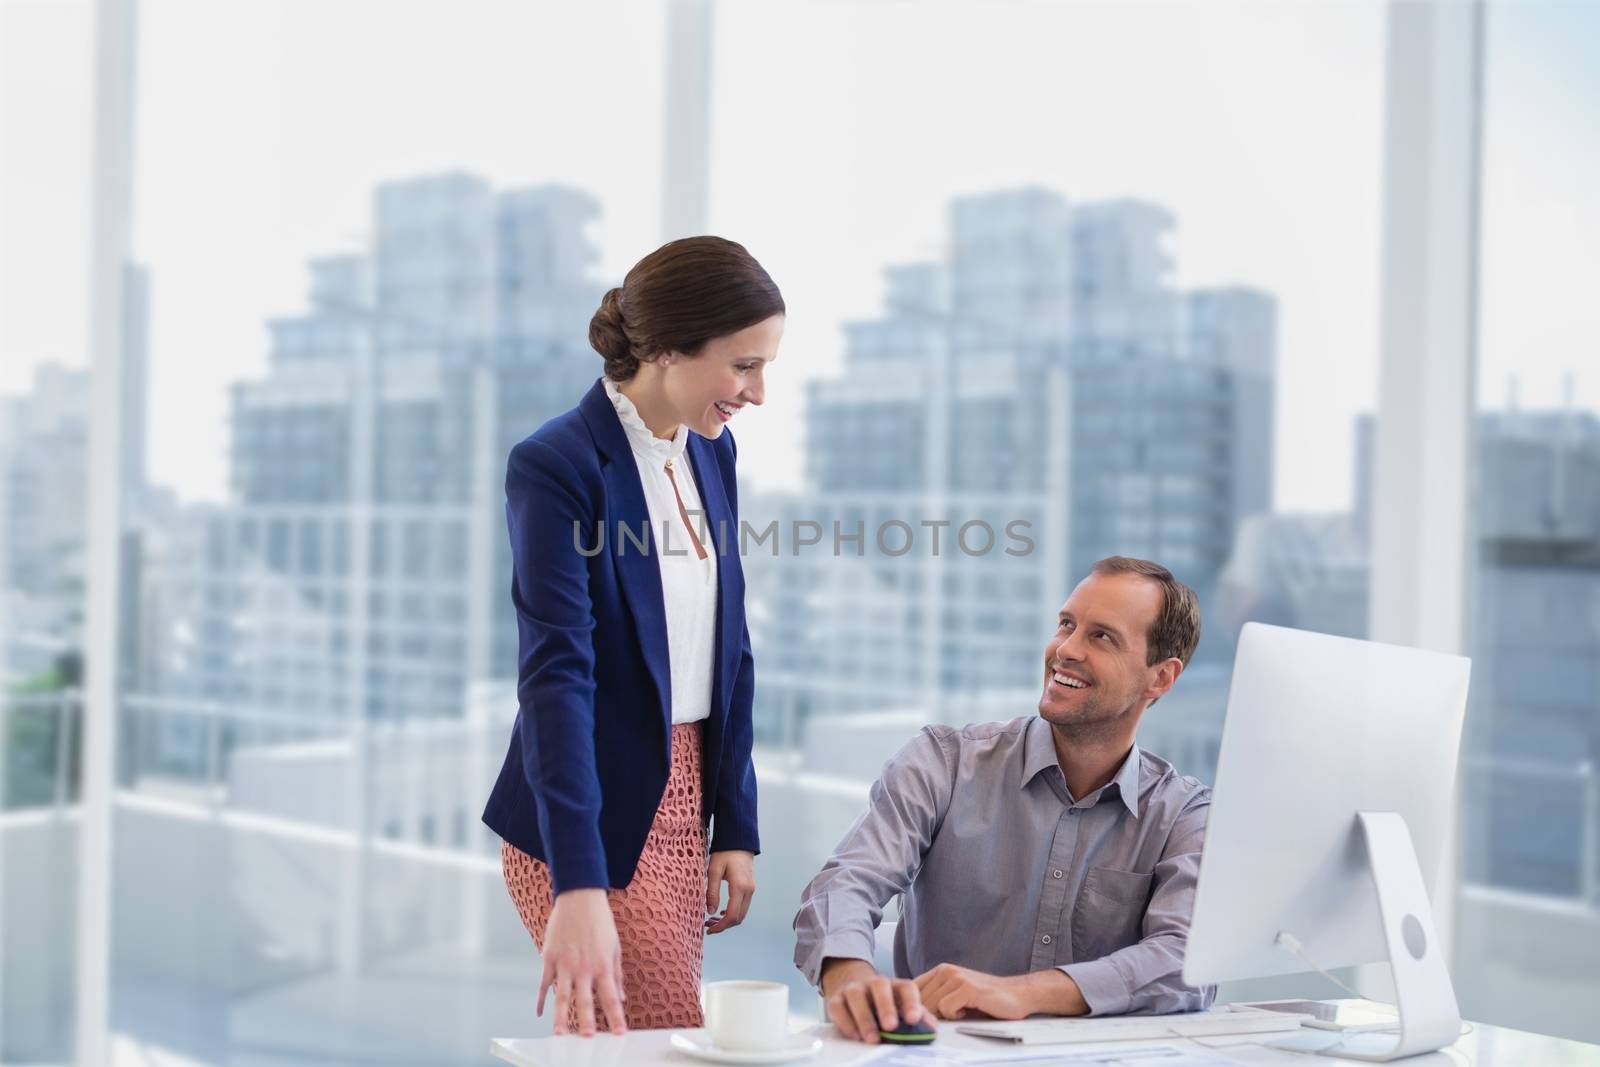 Business people at a desk smiling by Wavebreakmedia